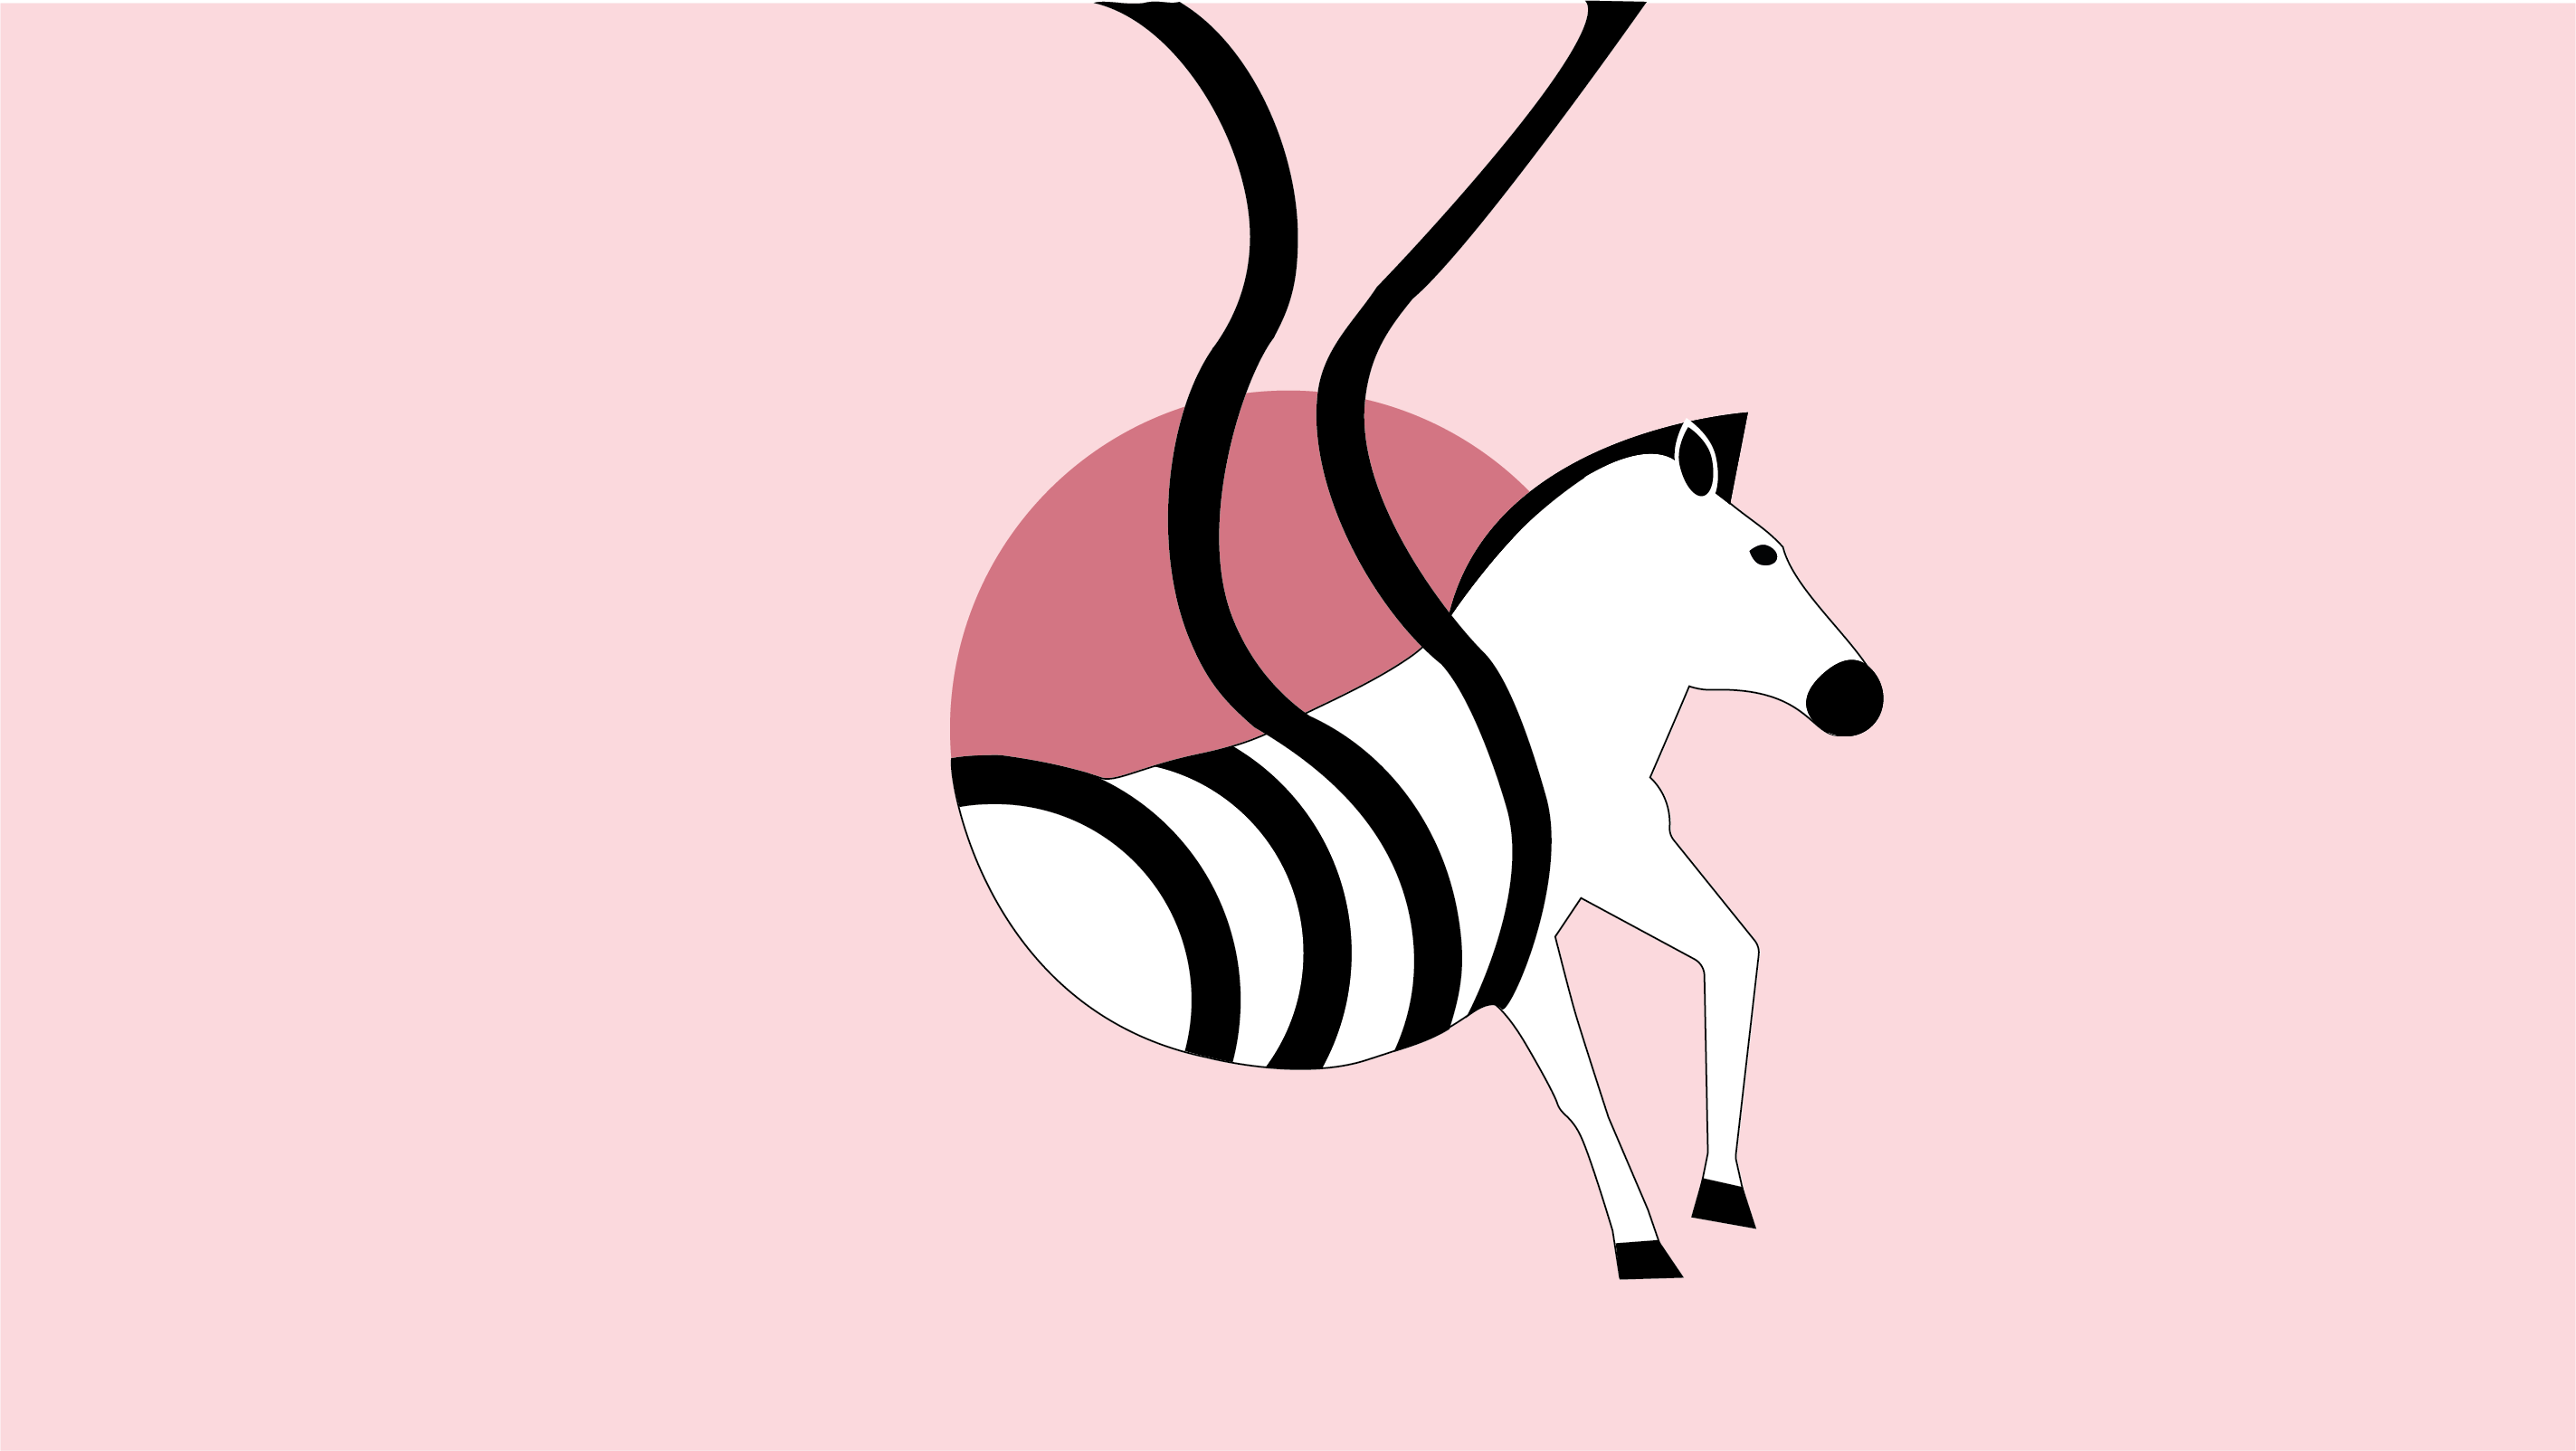 illustrated Zebra stripes coming off and going up in the air with pink background